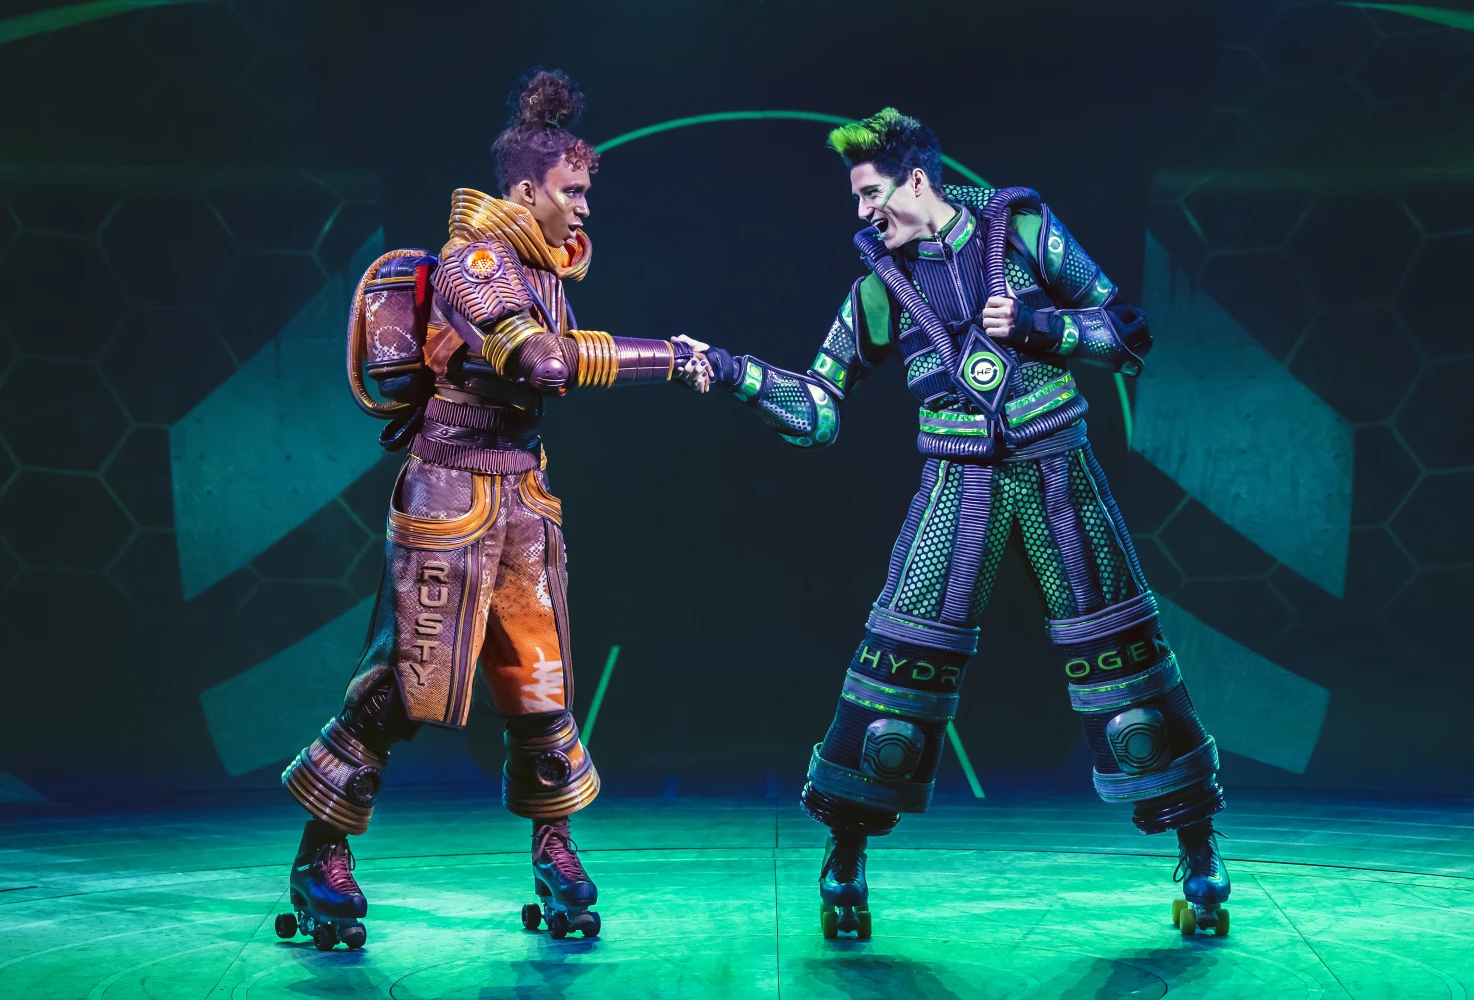 Starlight Express: What to expect - 3